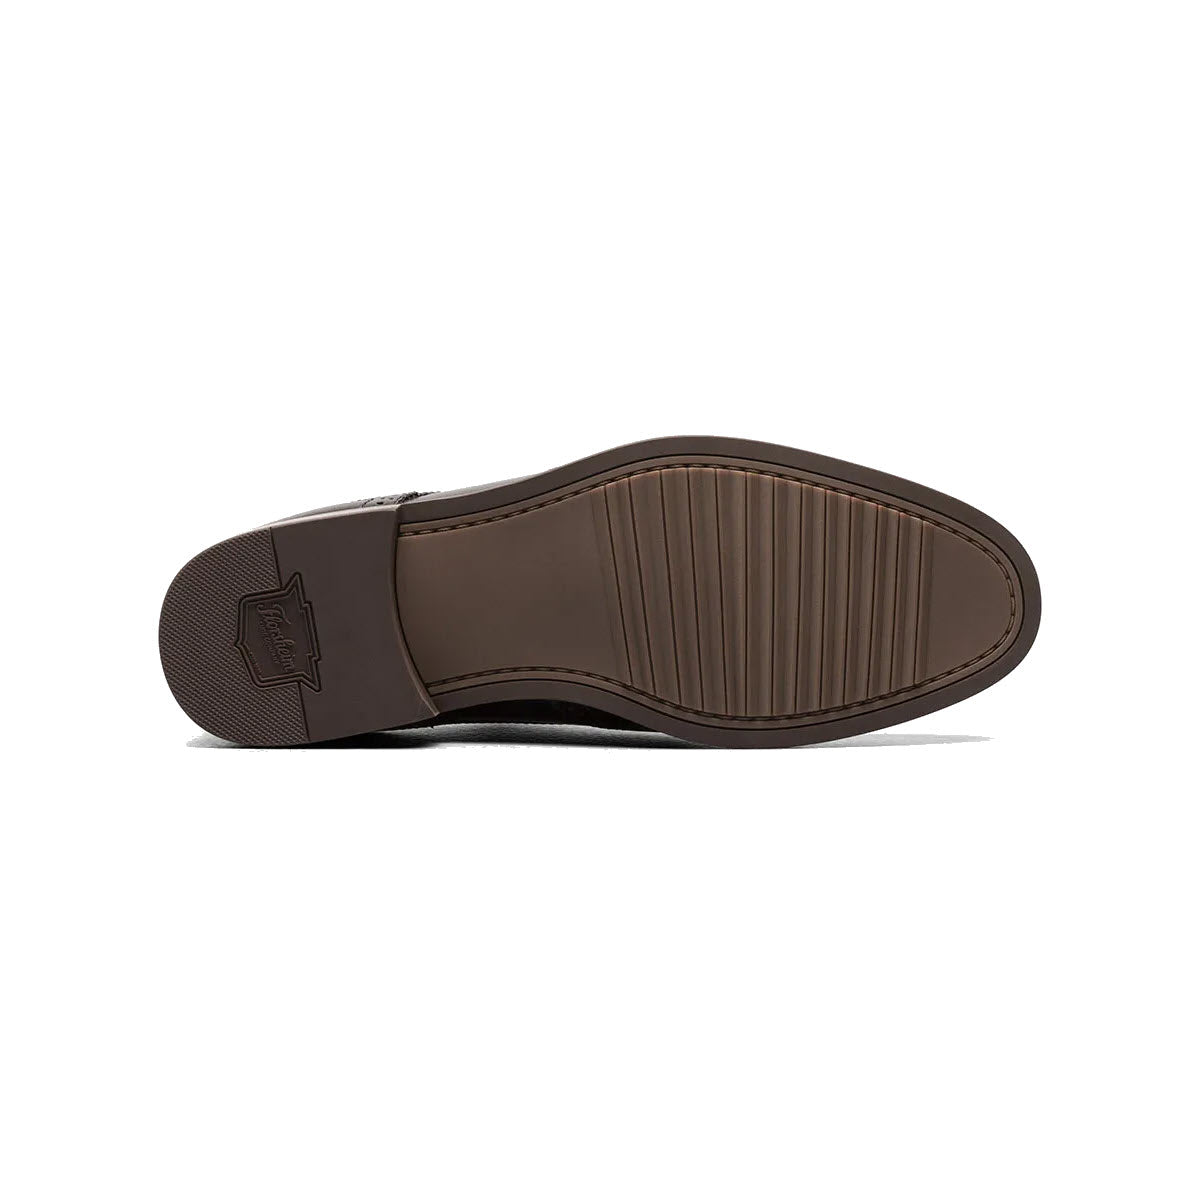 Brown sole of a Florsheim FLORSHEIM RUCCI CAP TOE OXFORD BLACK - MENS with logo imprint and ribbed design, shown against a white background.